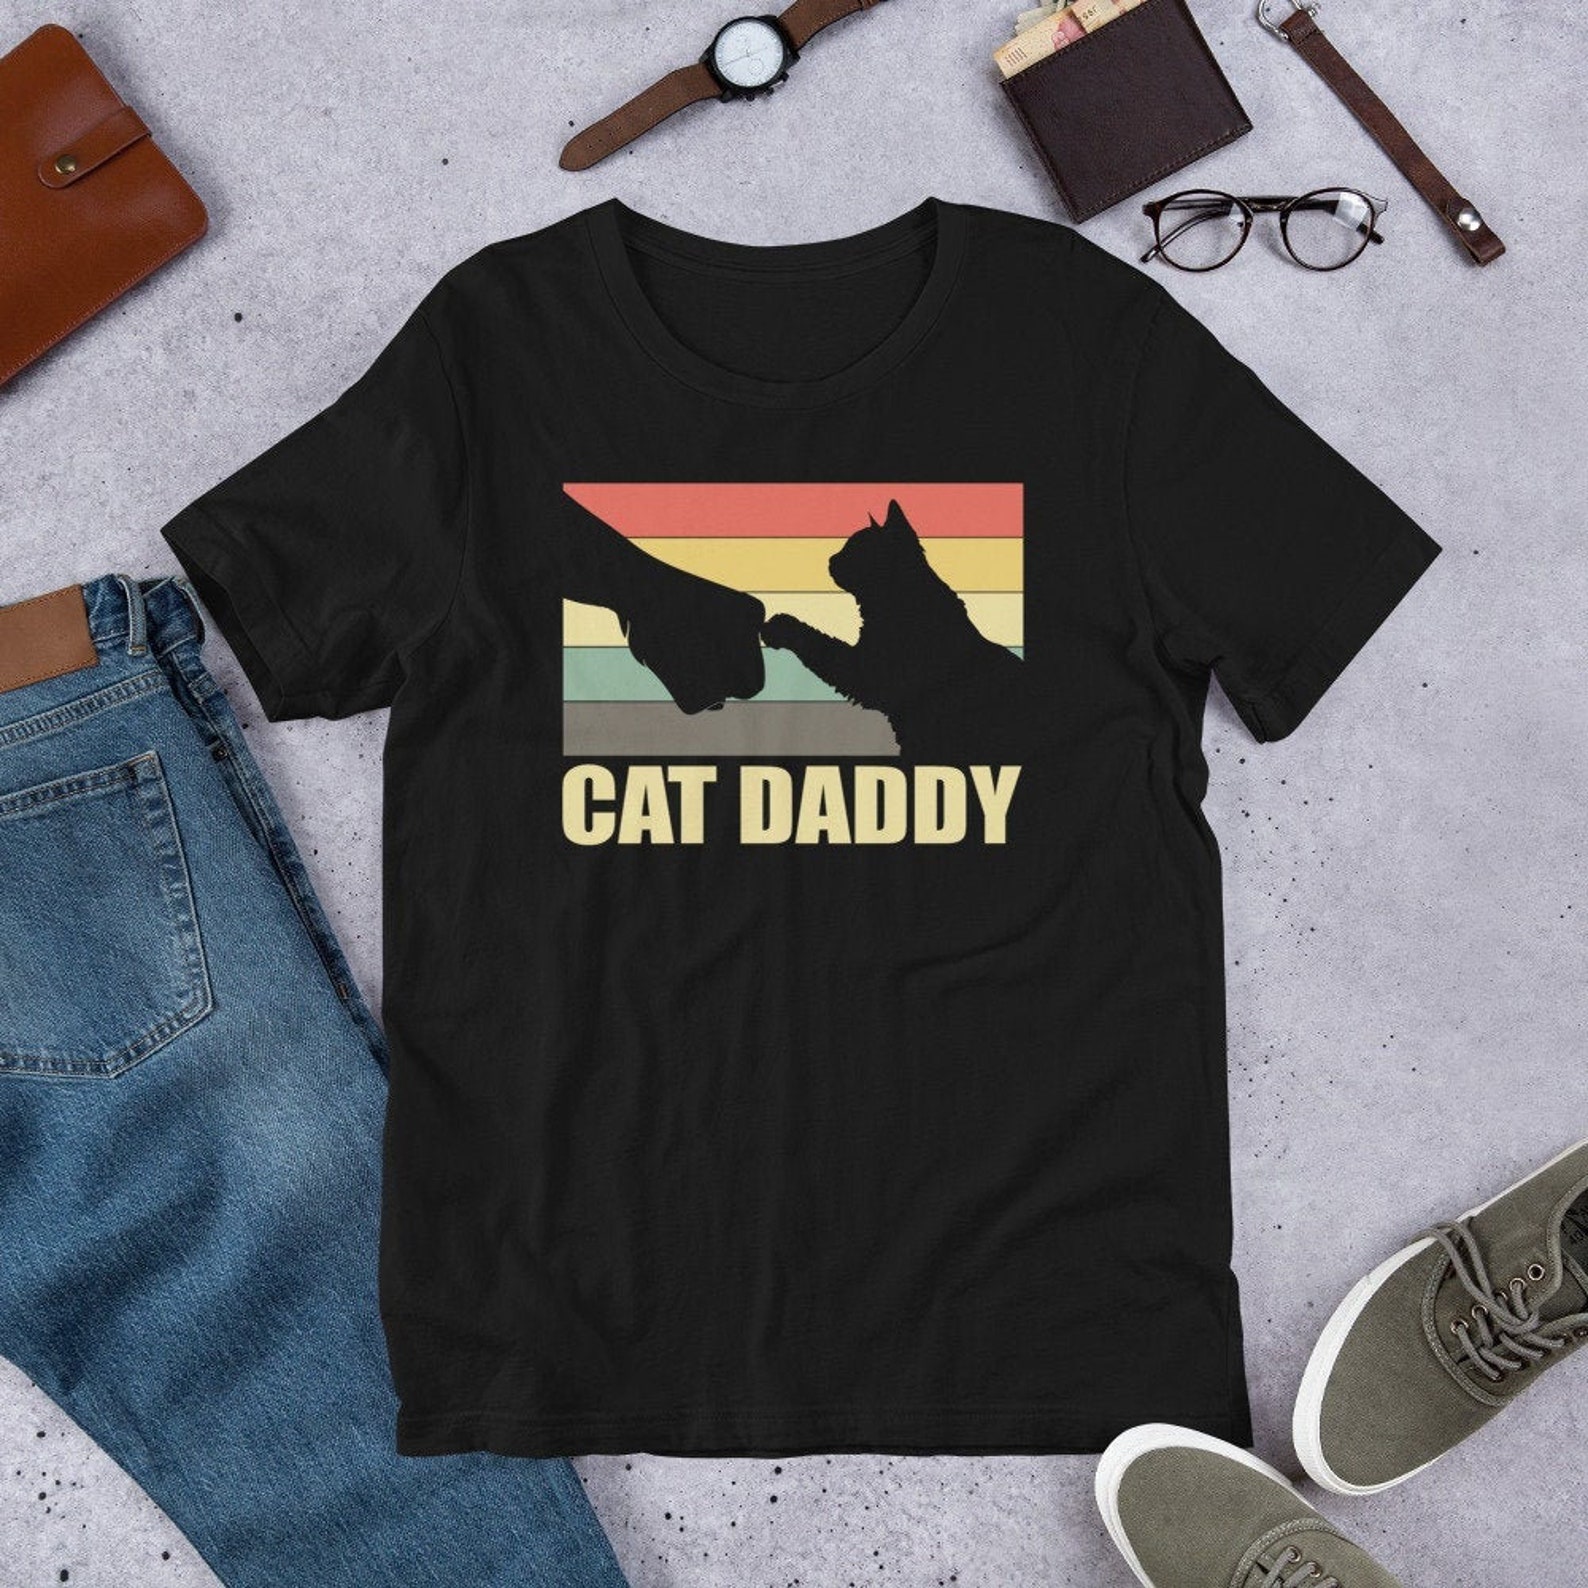 Cat Daddy Shirt Best Cat Dad Ever Tee Cat Lover Tshirt Cat Etsy